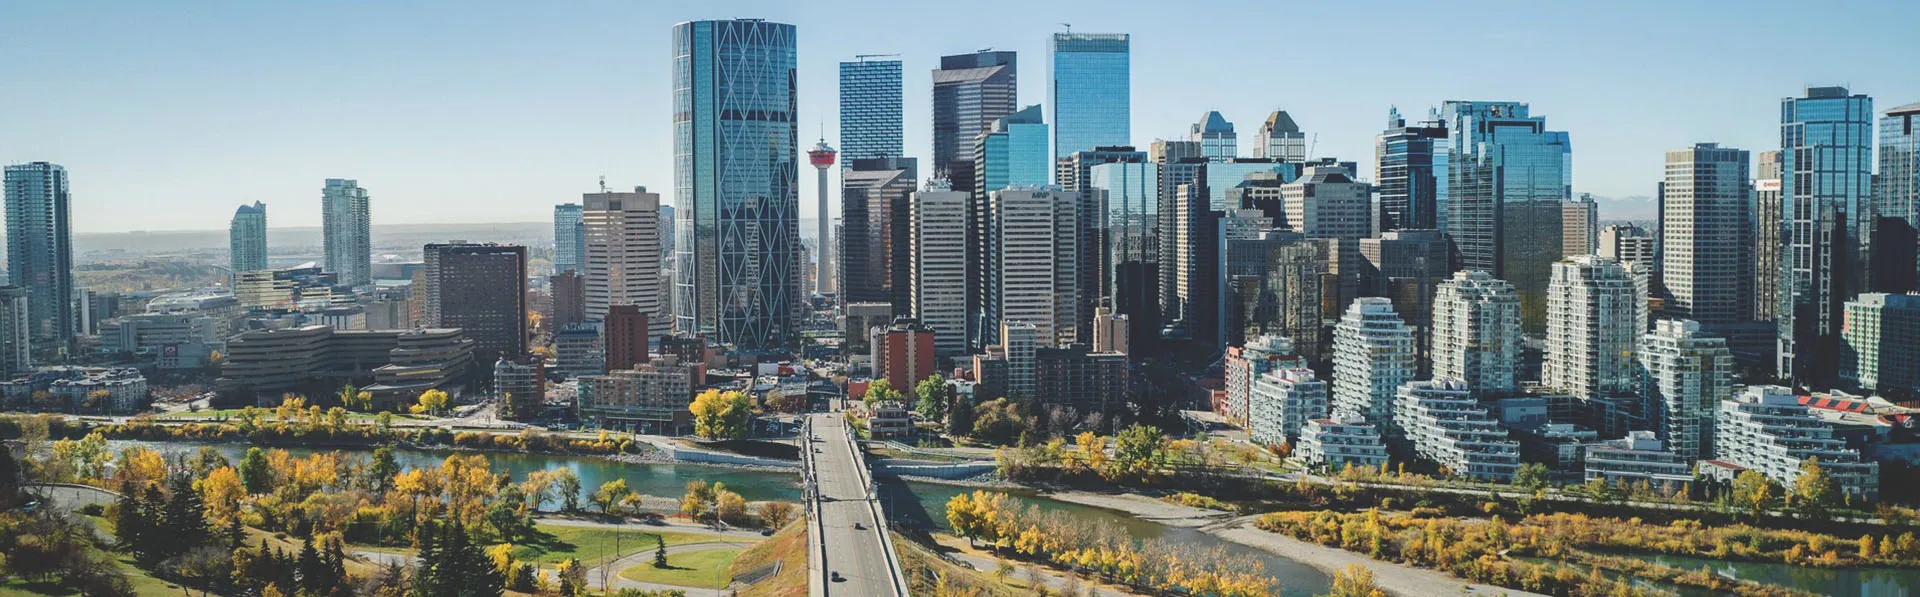 aerial of the Calgary skyline looking down Centre street during late summer